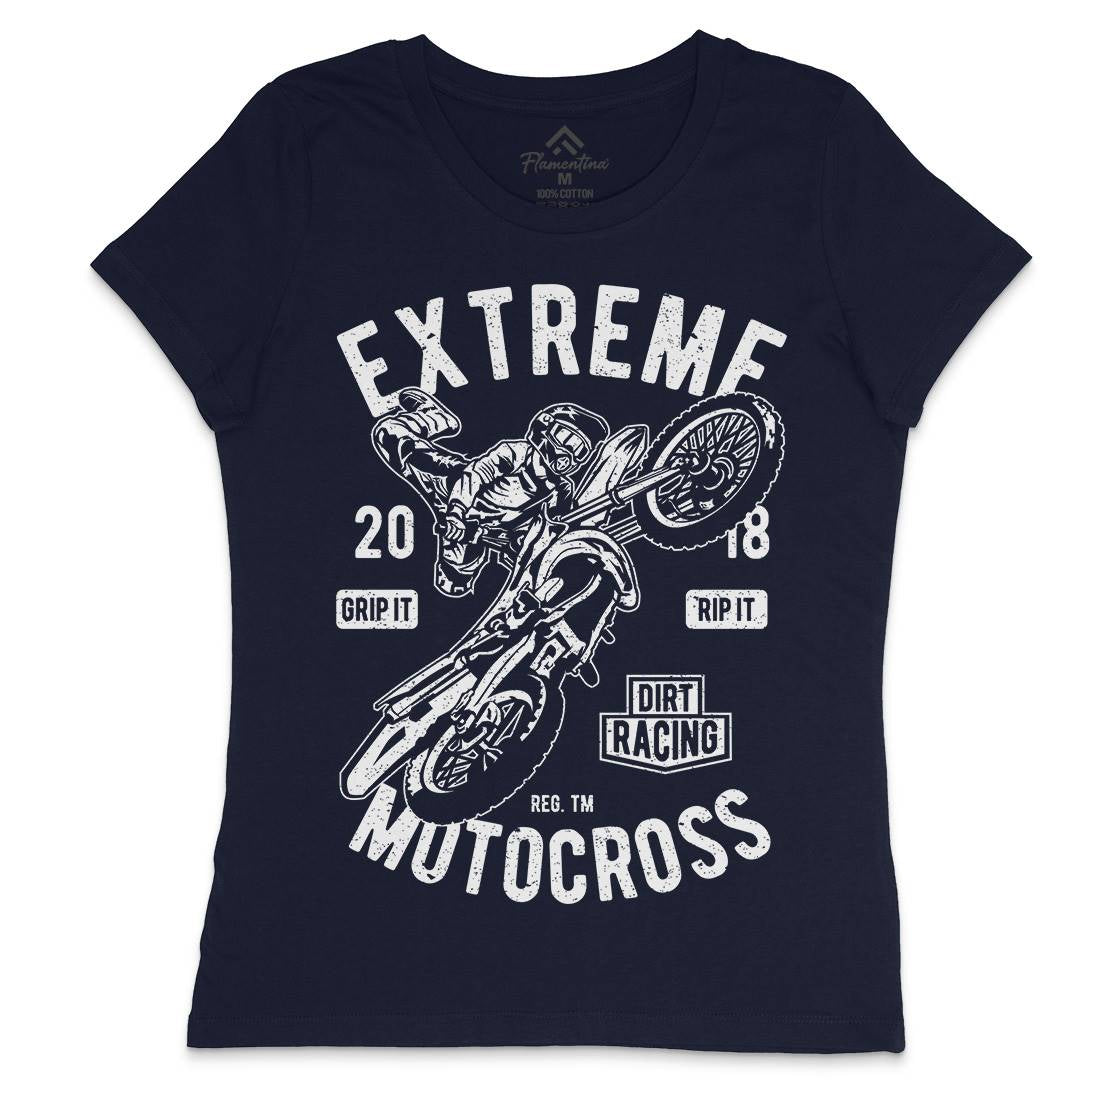 Extreme Motocross Womens Crew Neck T-Shirt Motorcycles A651